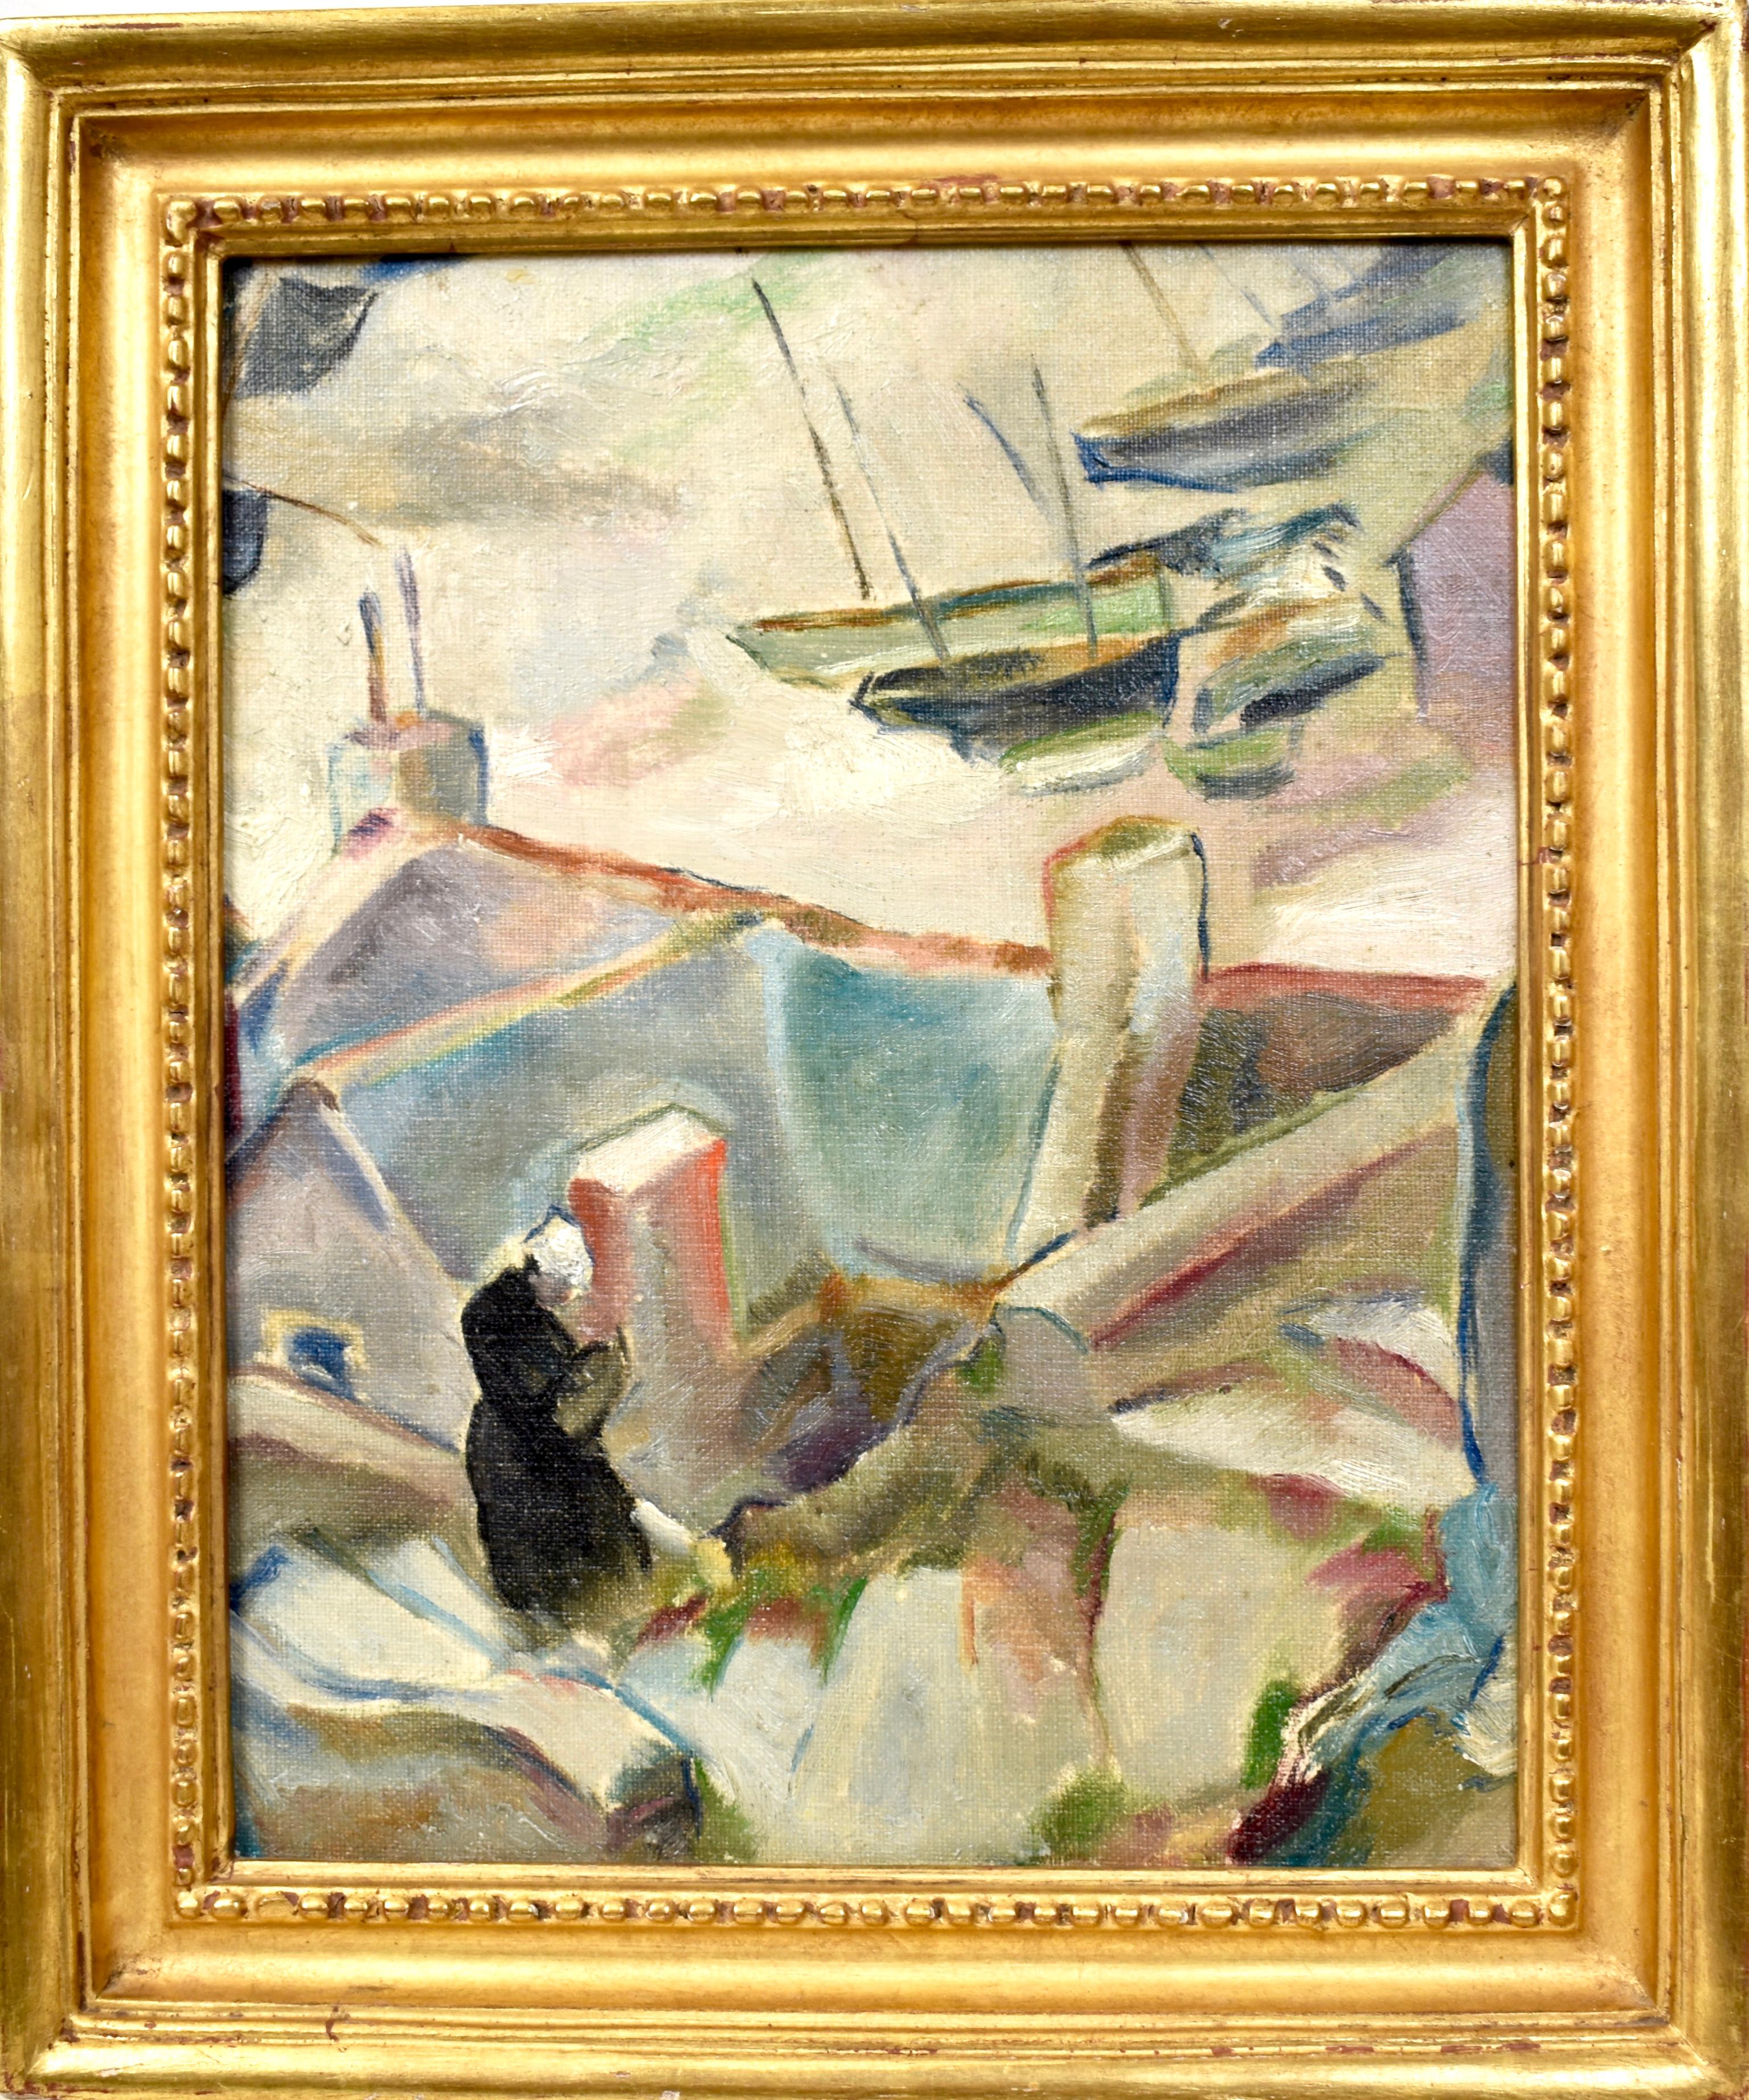 Unknown Abstract Painting - Paris Modern Cubist Abstracted Harbor View Original Antique Oil Painting